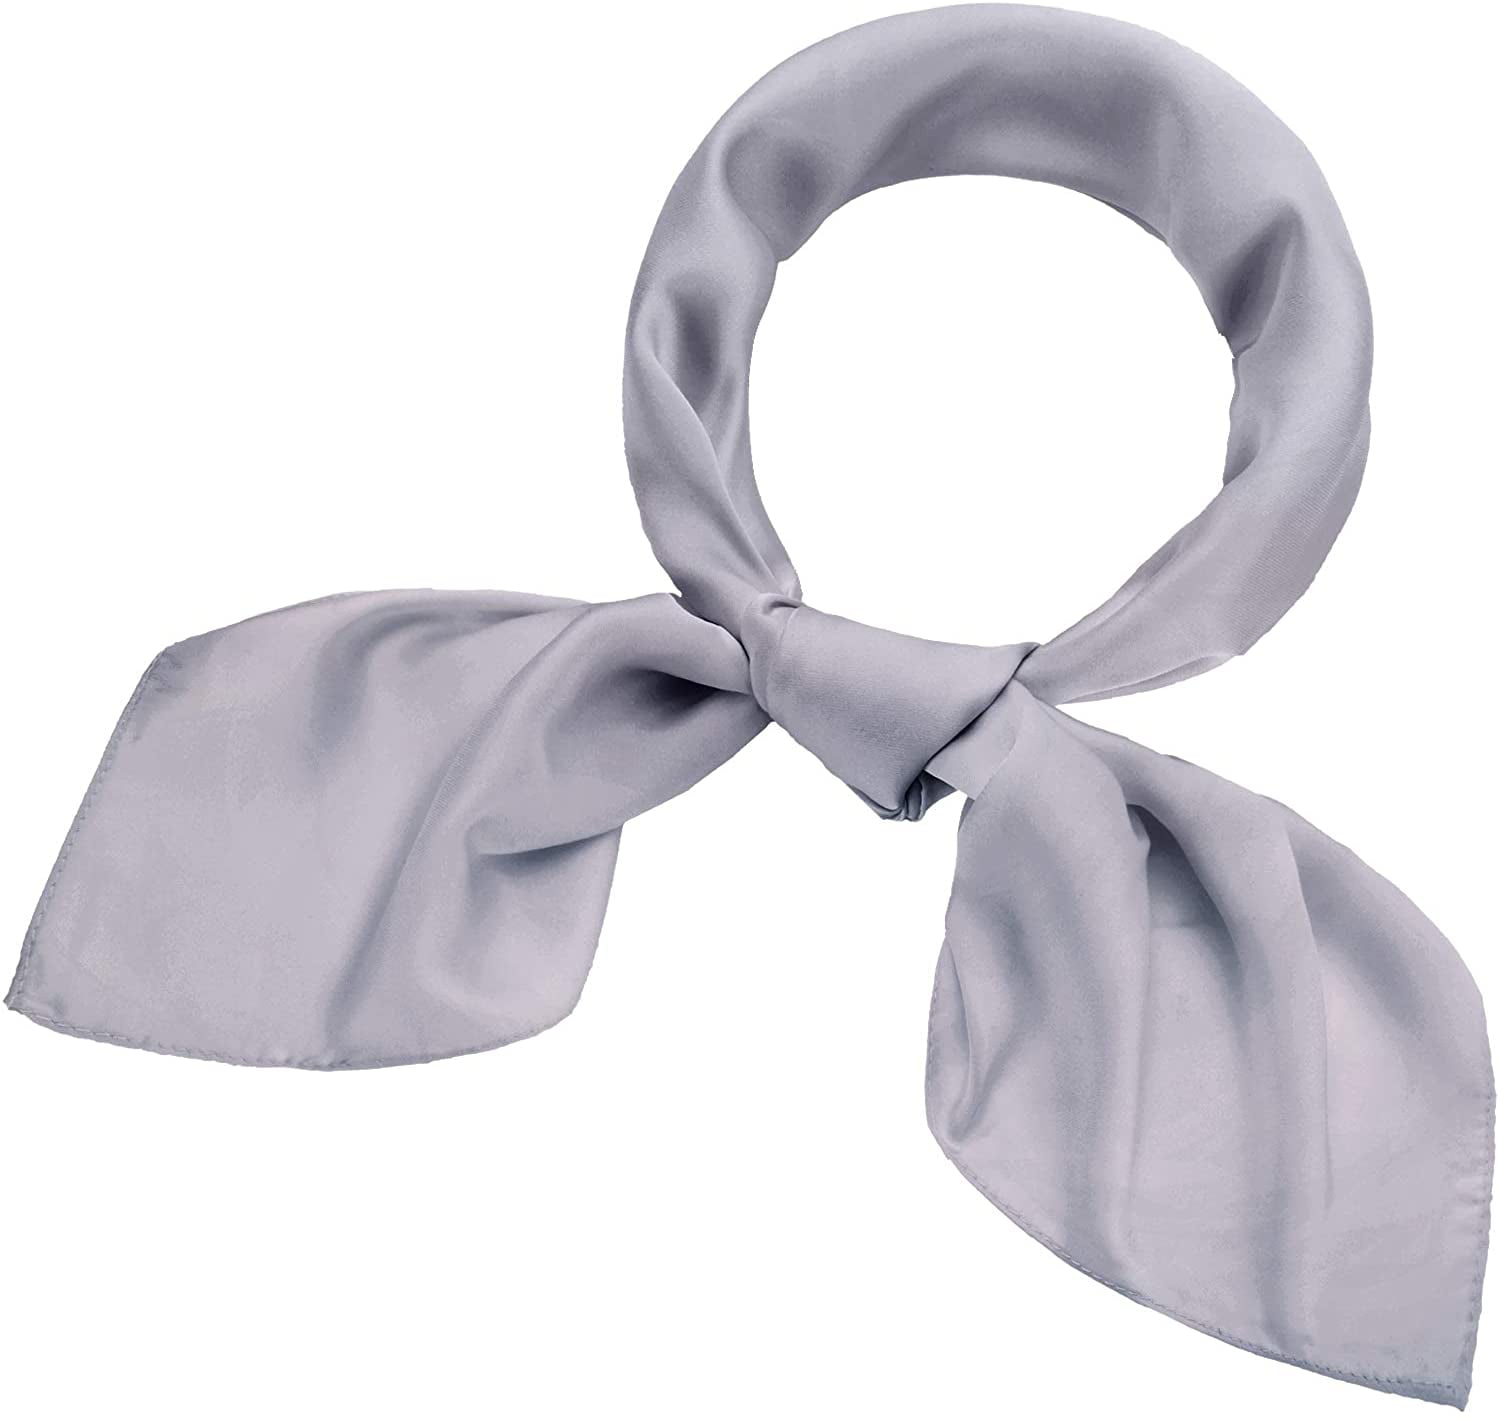 Neck scarf chiffon silver grey scarf neck tie women accessories gold square scarf other colors available on demand